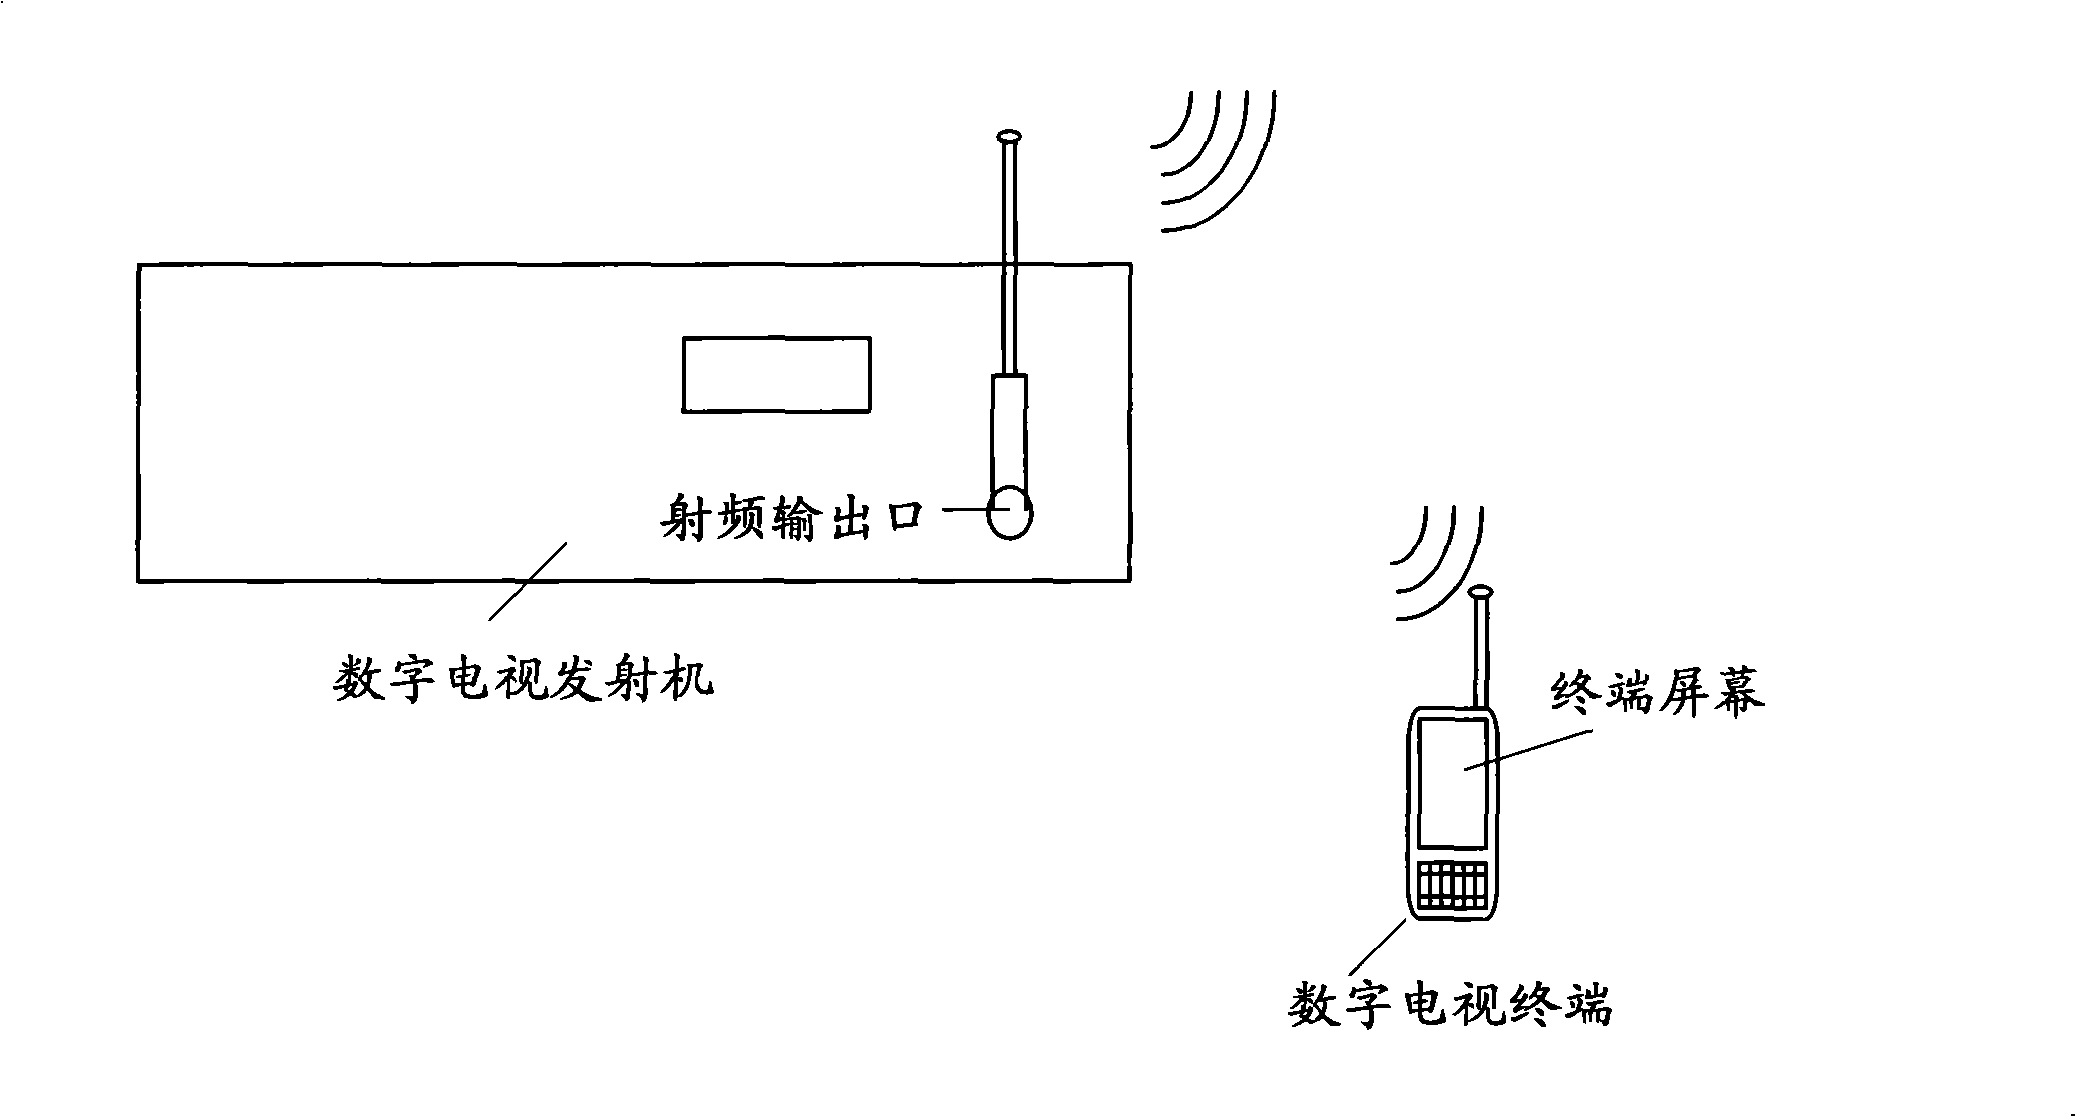 Method for testing receiving performance of digital television receiving terminal